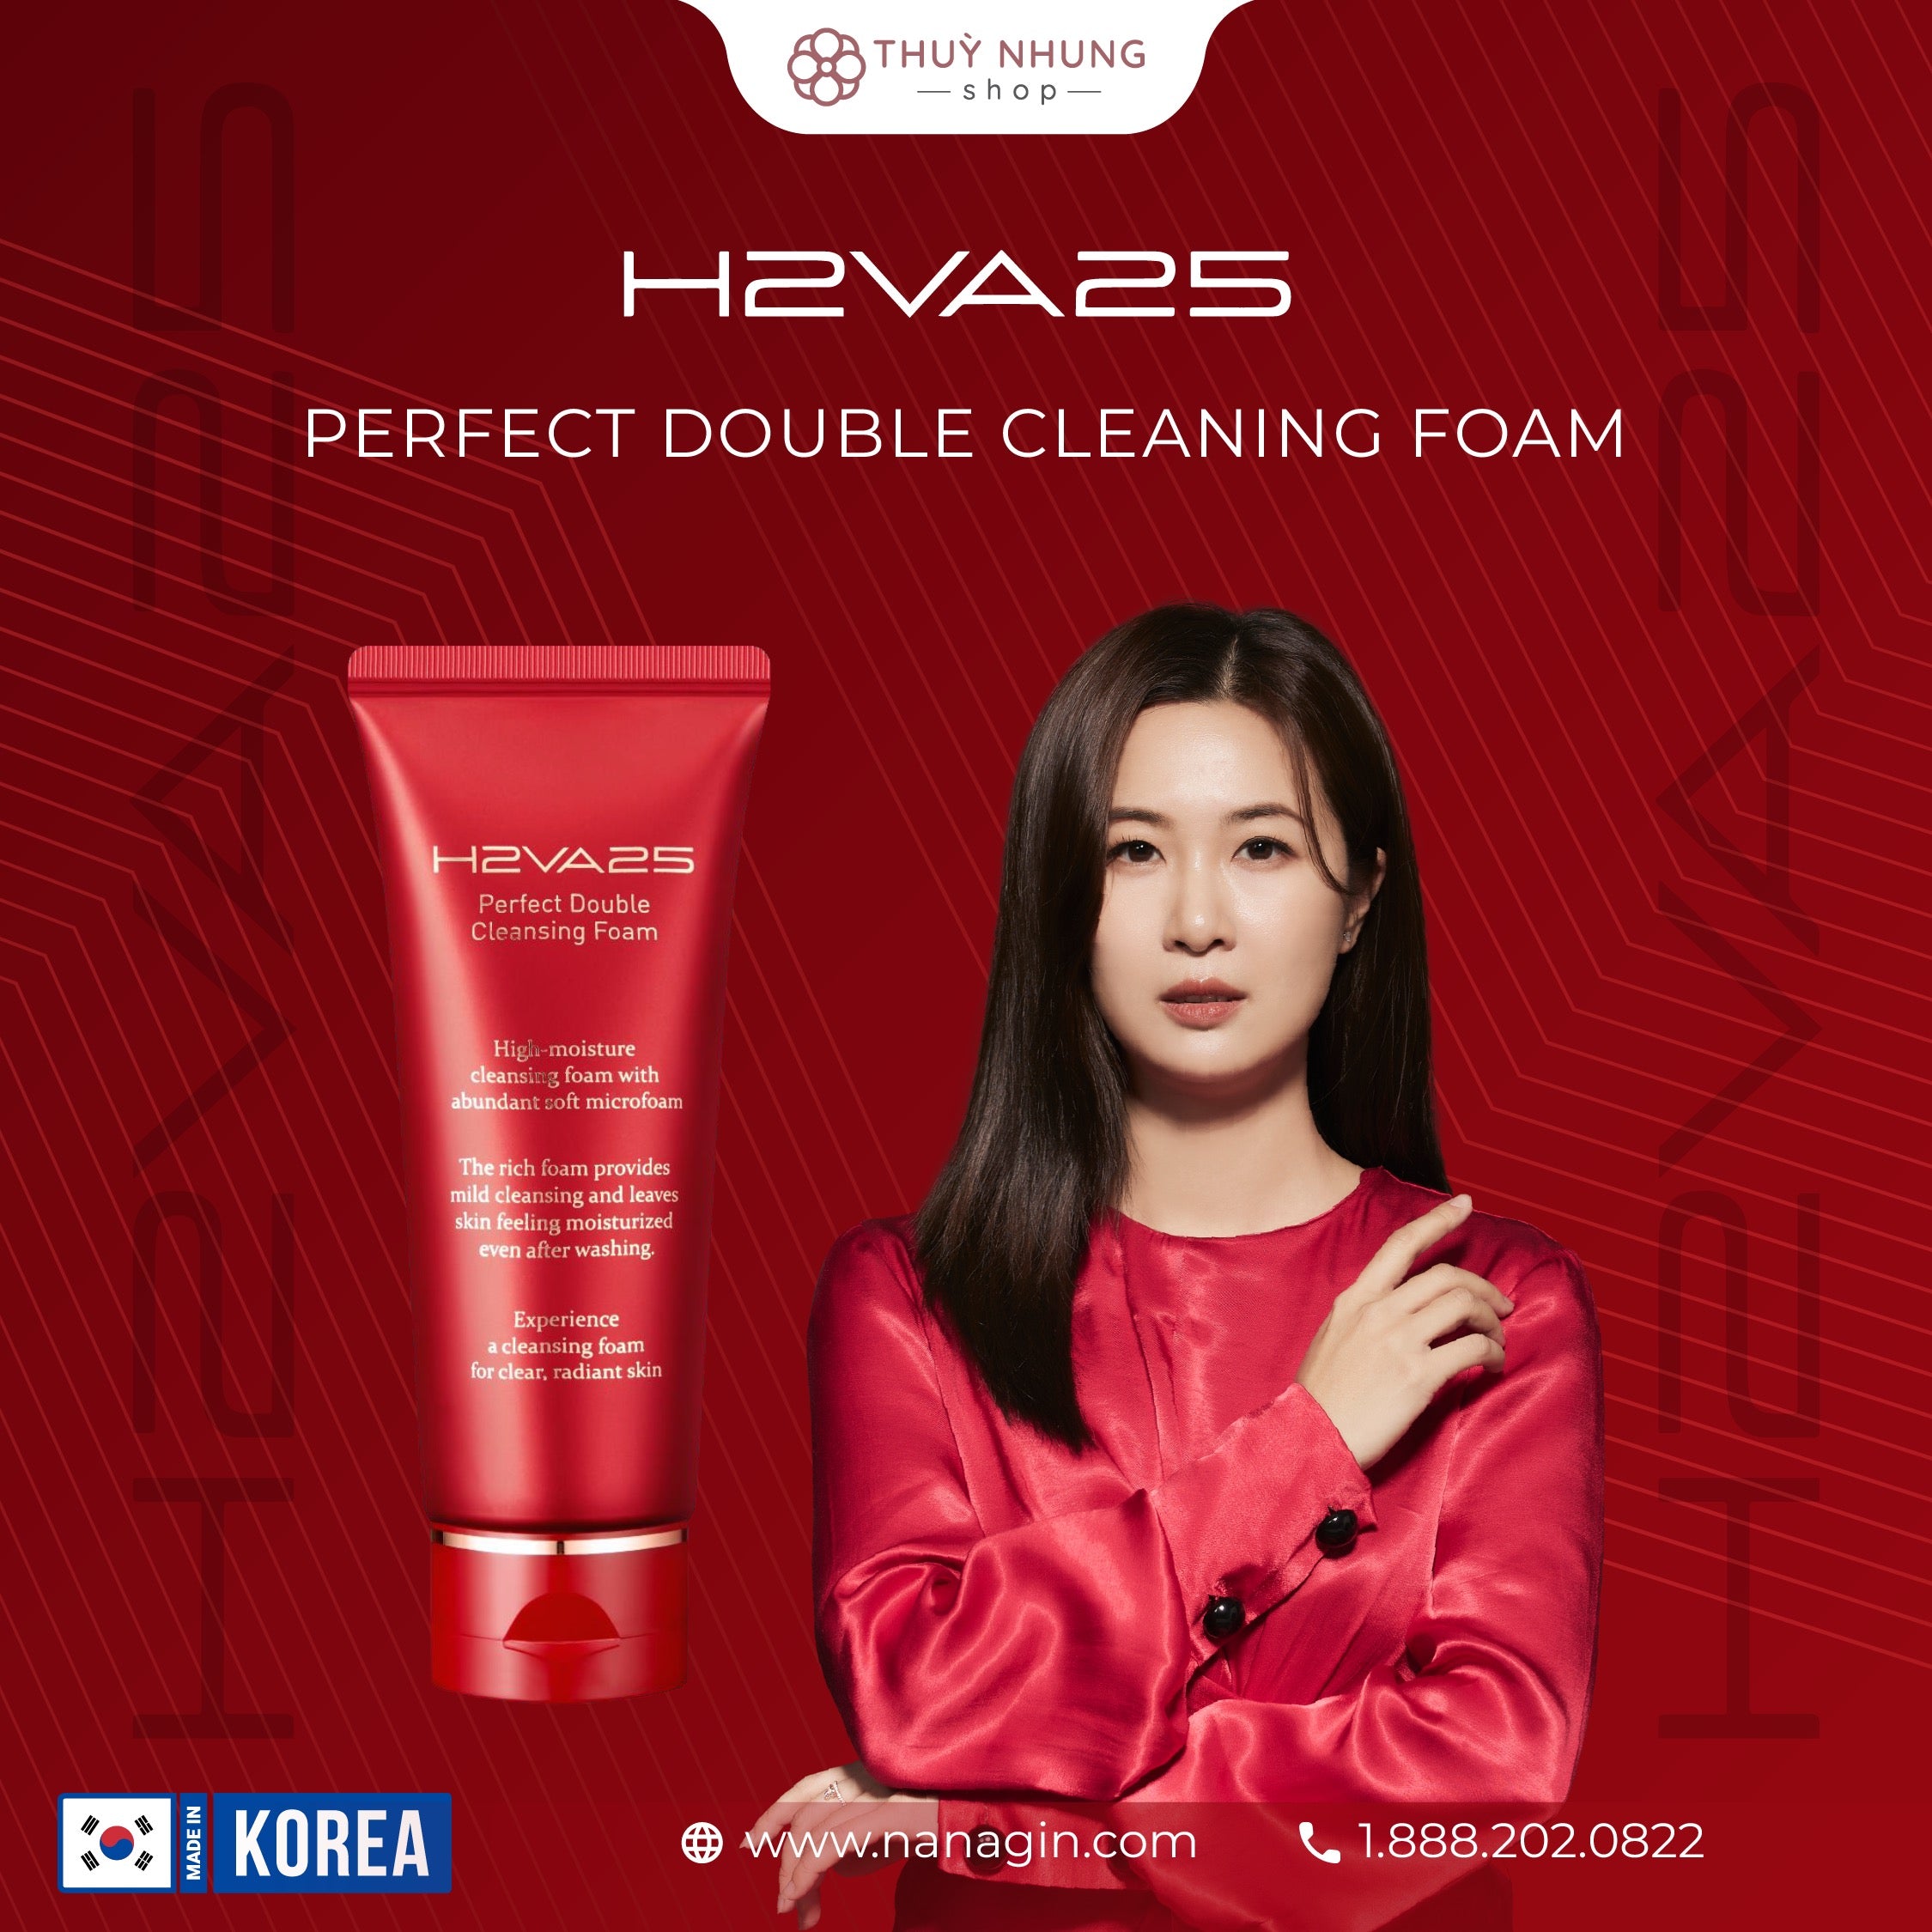 APYLD H2VA25 Perfect Double Cleansing Foam 100ml - Thuy Nhung Shop